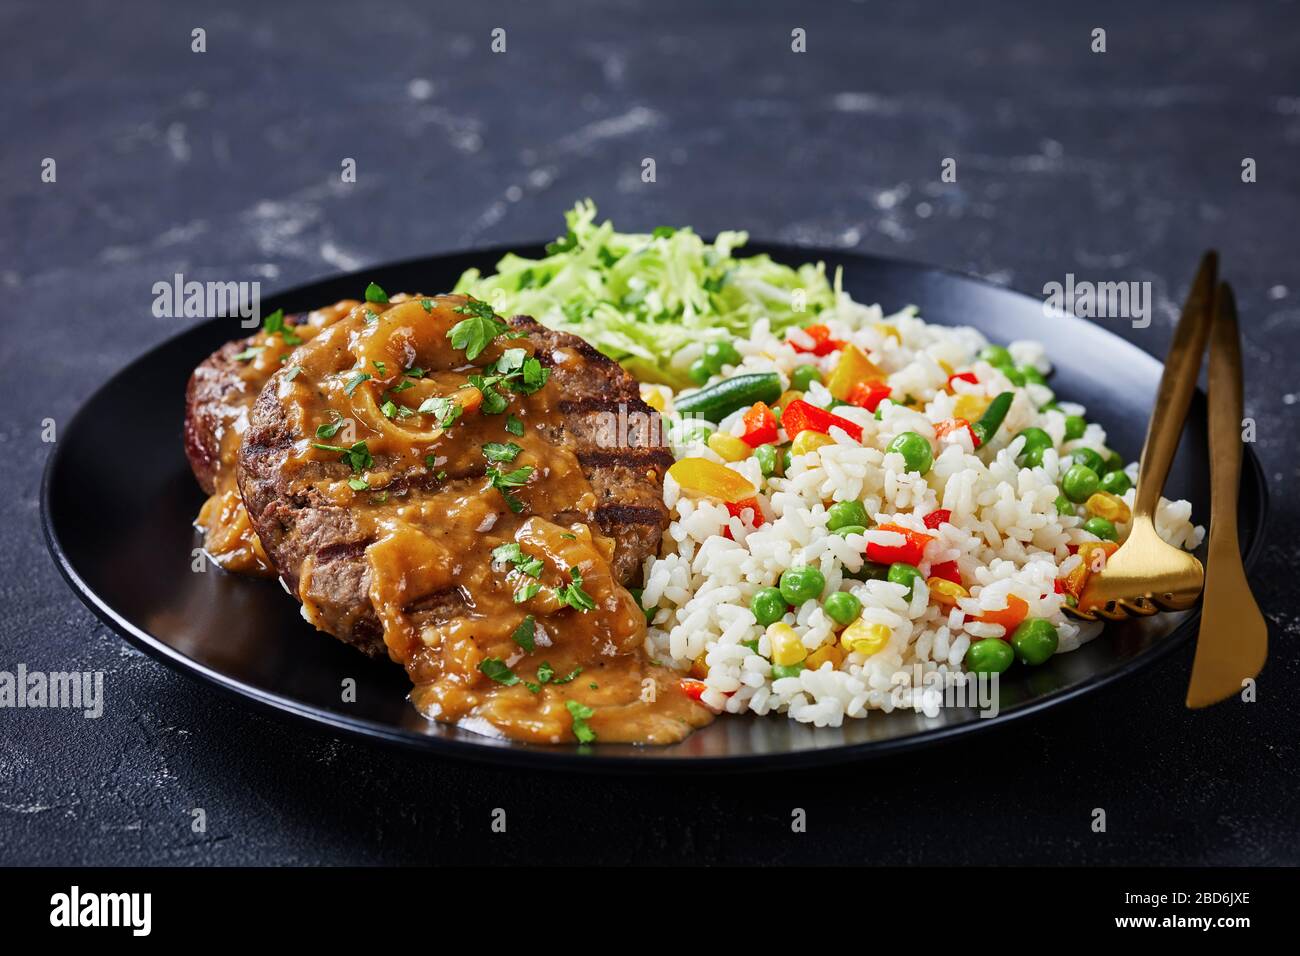 close-up of a portion of grilled ground beef steaks with onion gravy, coleslaw and rice mixed with vegetables on a black plate on a concrete table, ho Stock Photo